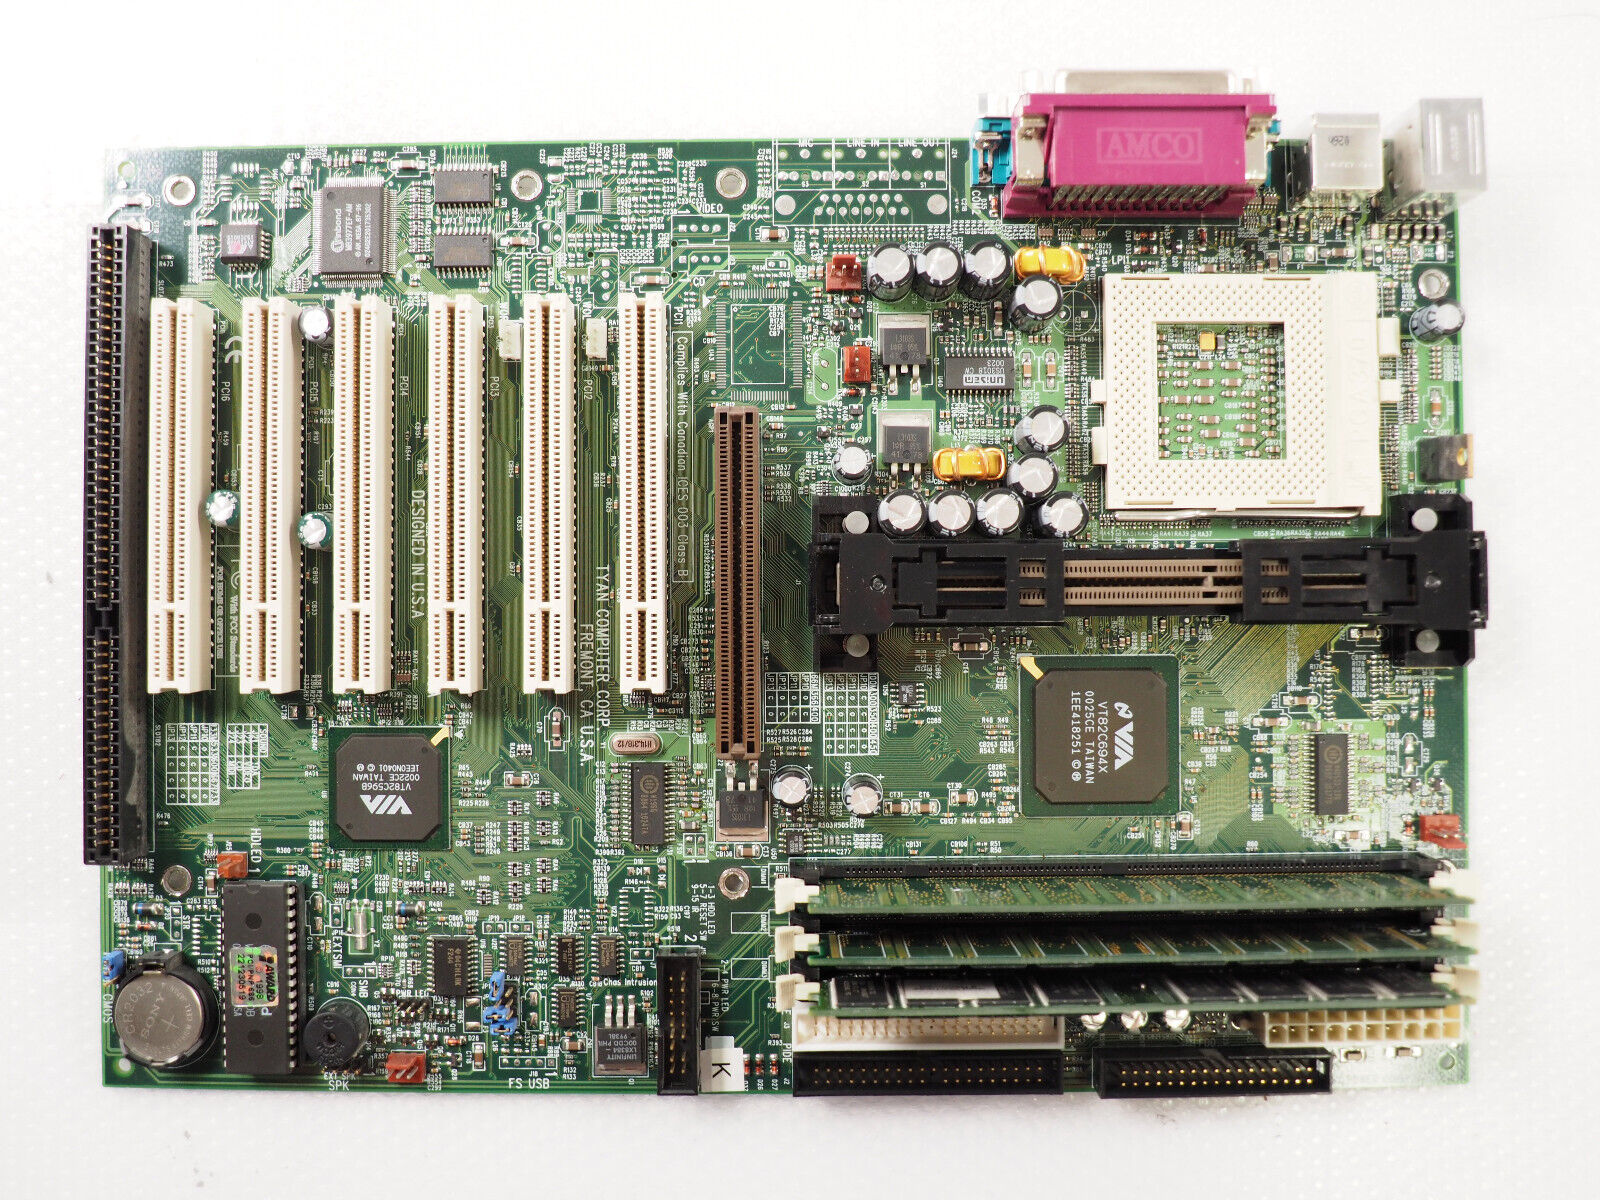 TYAN Computer Corp. S1854 AGPX4-PCI-ISA Motherboard w/ 3 x 128Mb RAM No CPU